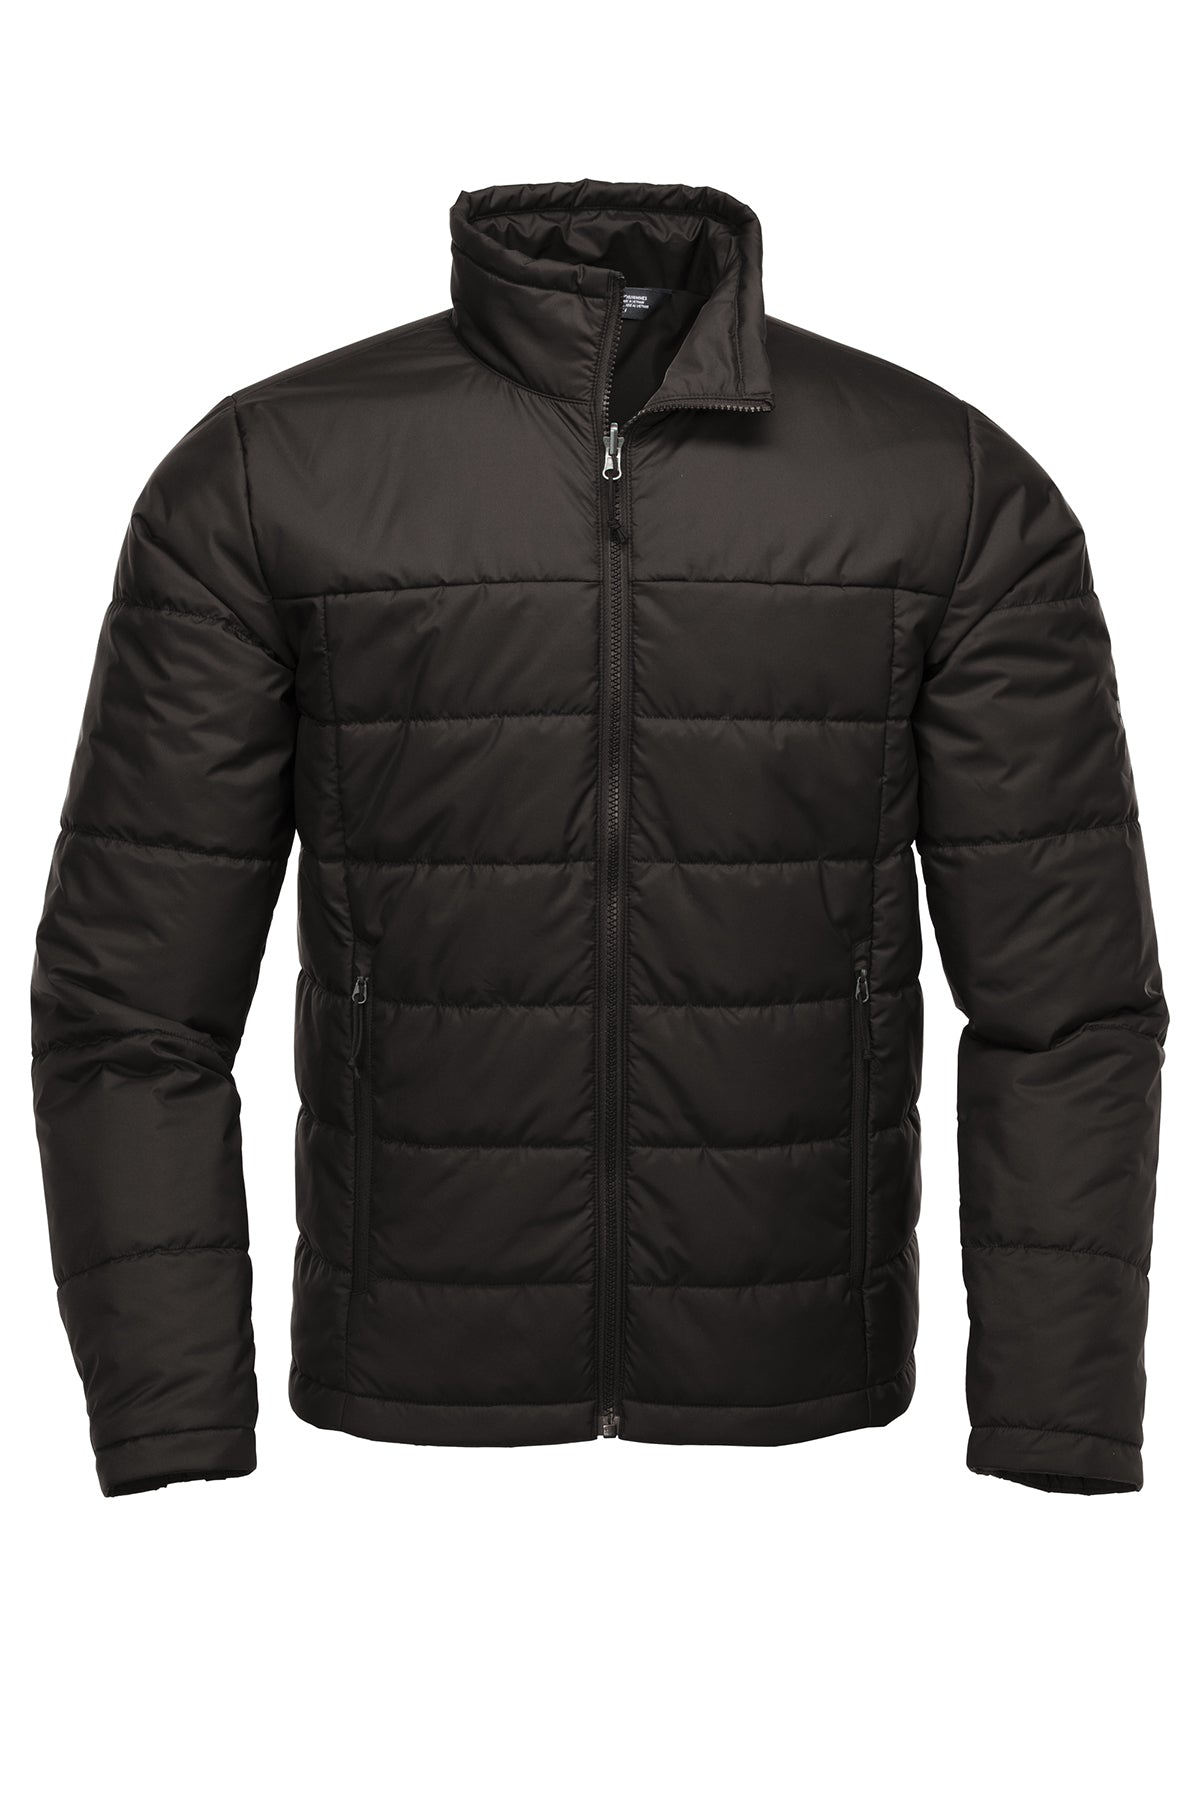 The North Face ® Traverse Triclimate ® 3-in-1 Jacket NF0A3VHR